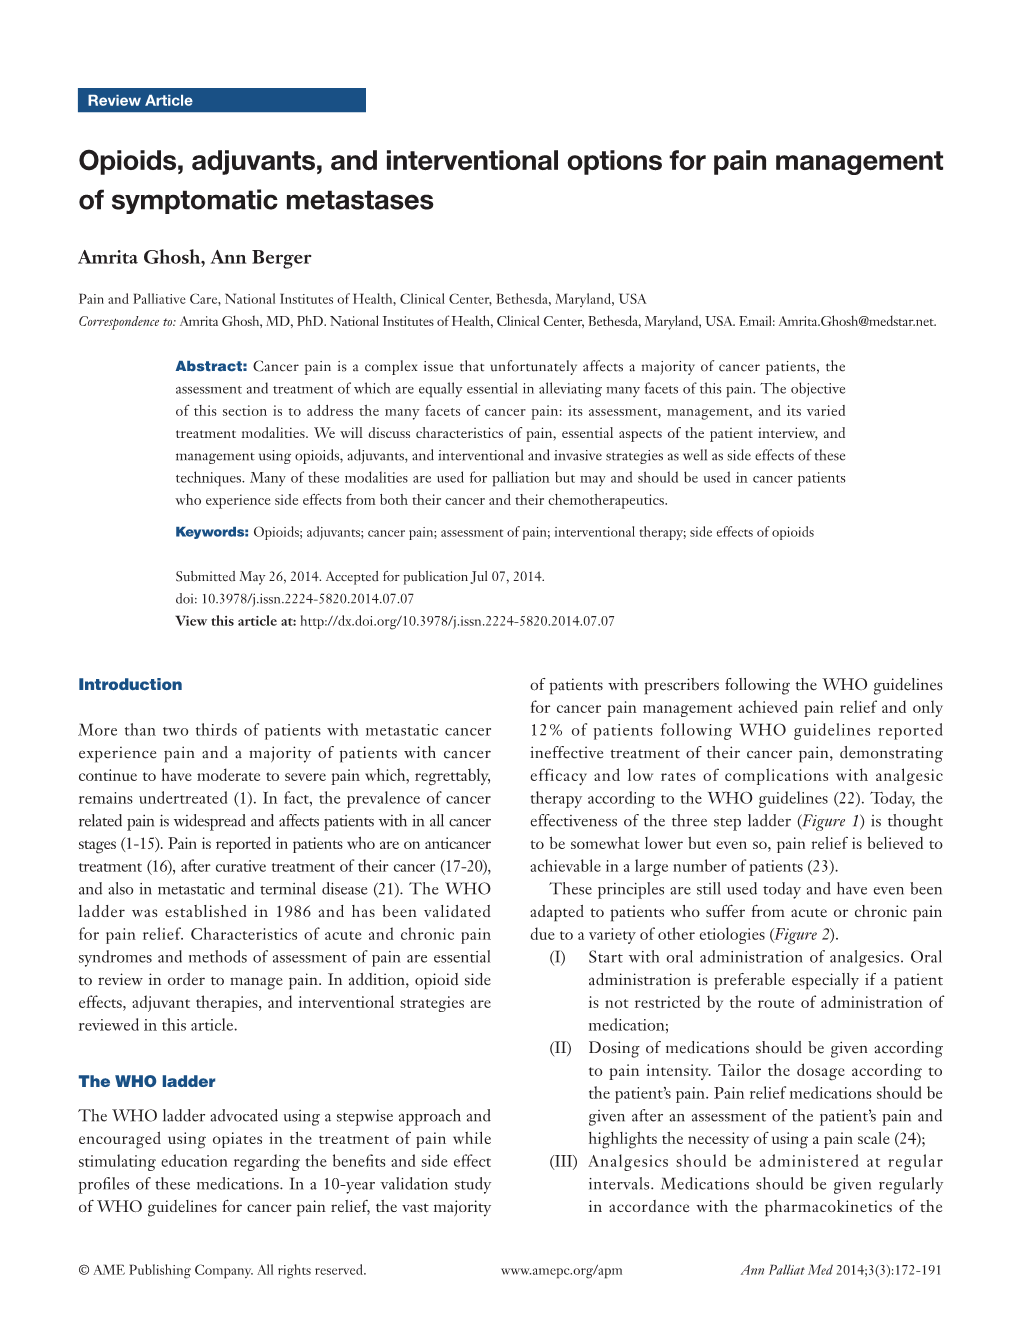 Opioids, Adjuvants, and Interventional Options for Pain Management of Symptomatic Metastases